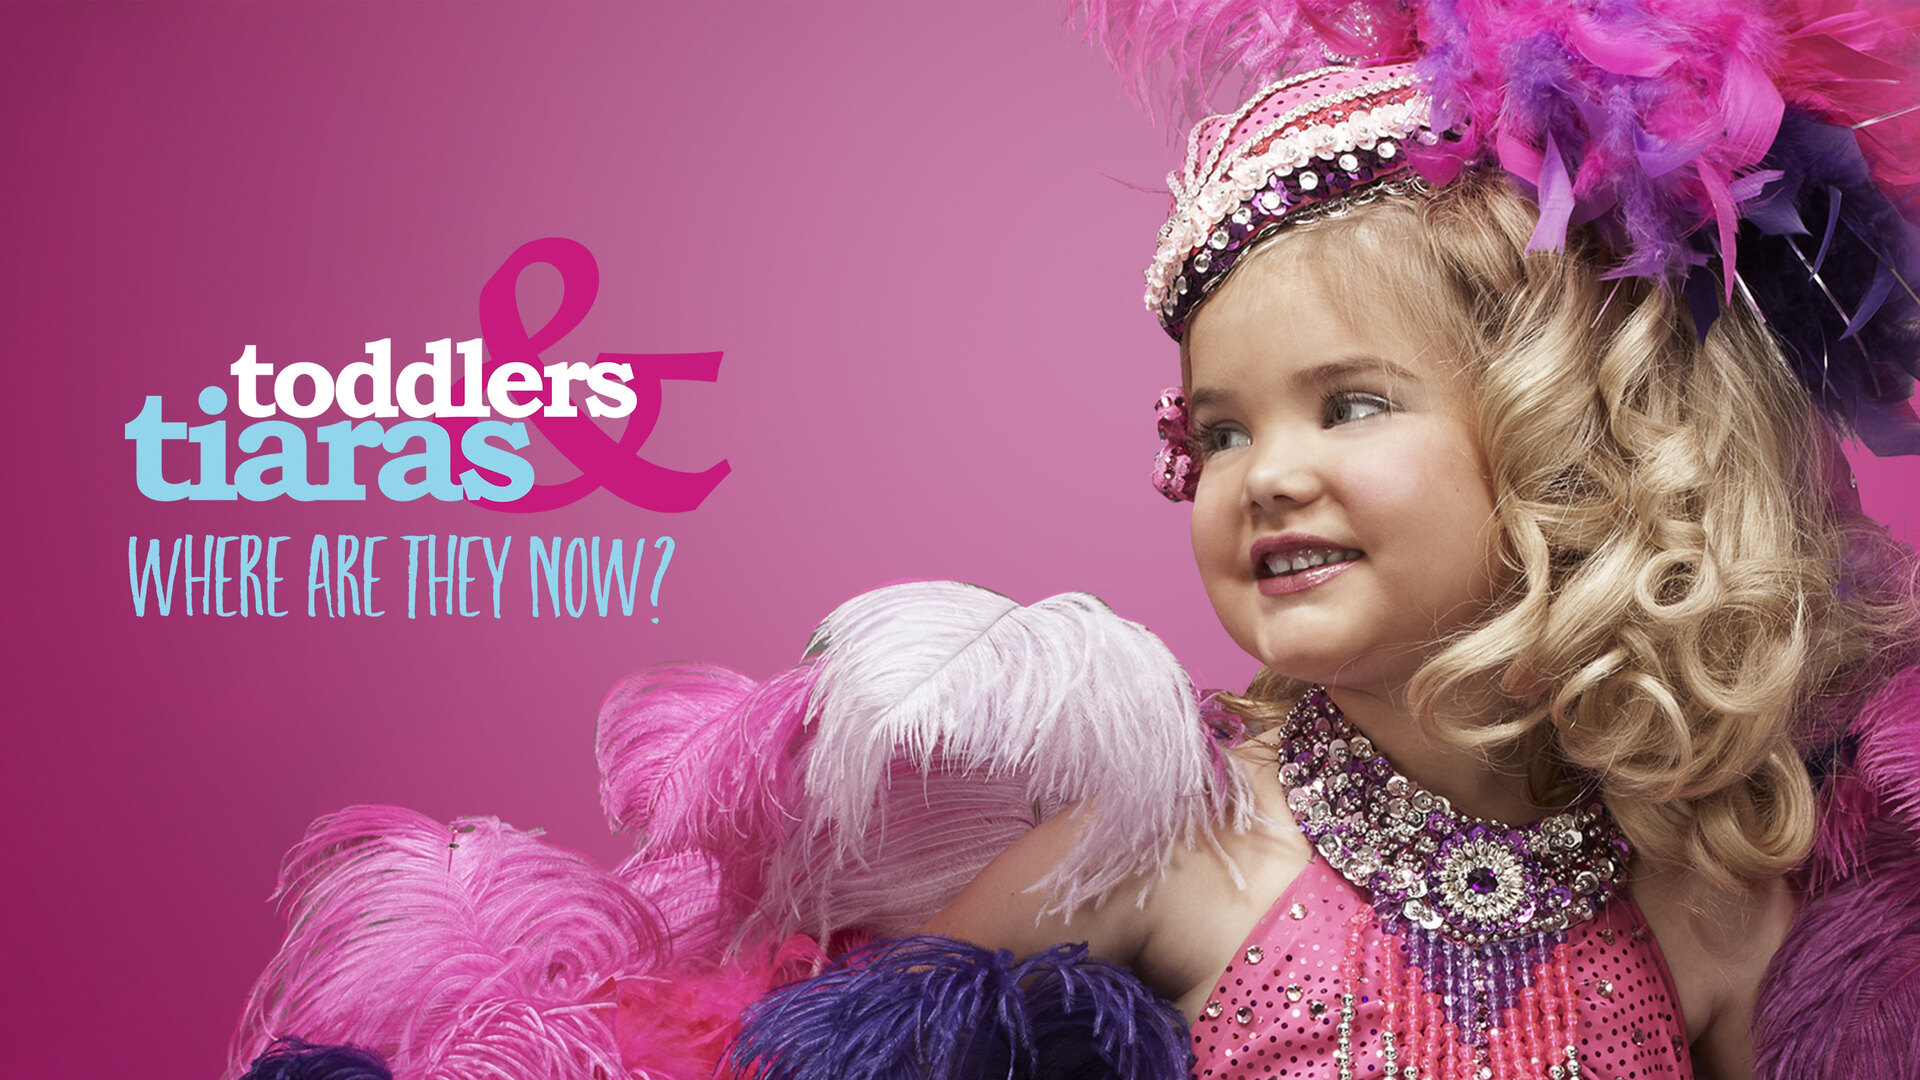 toddlers-tiaras-where-are-they-now-countdown-how-many-days-until